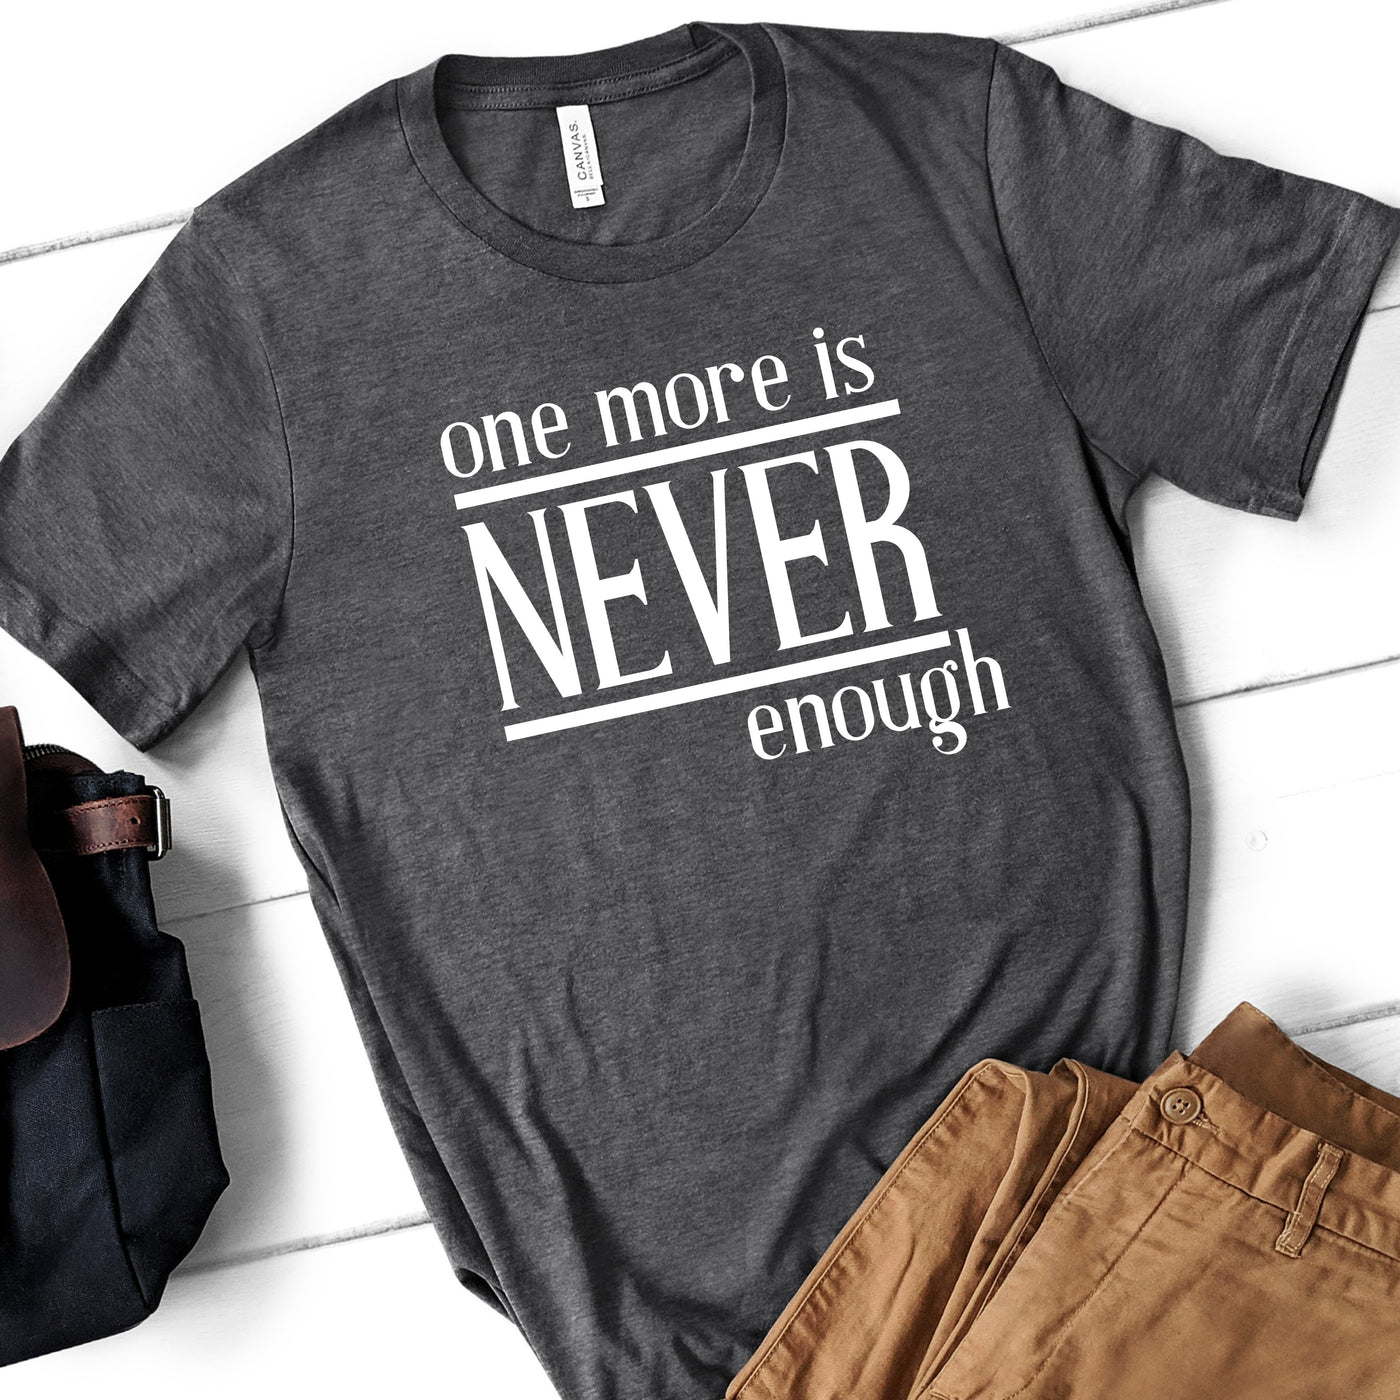 One More is Never Enough | Funny Drinking Shirts